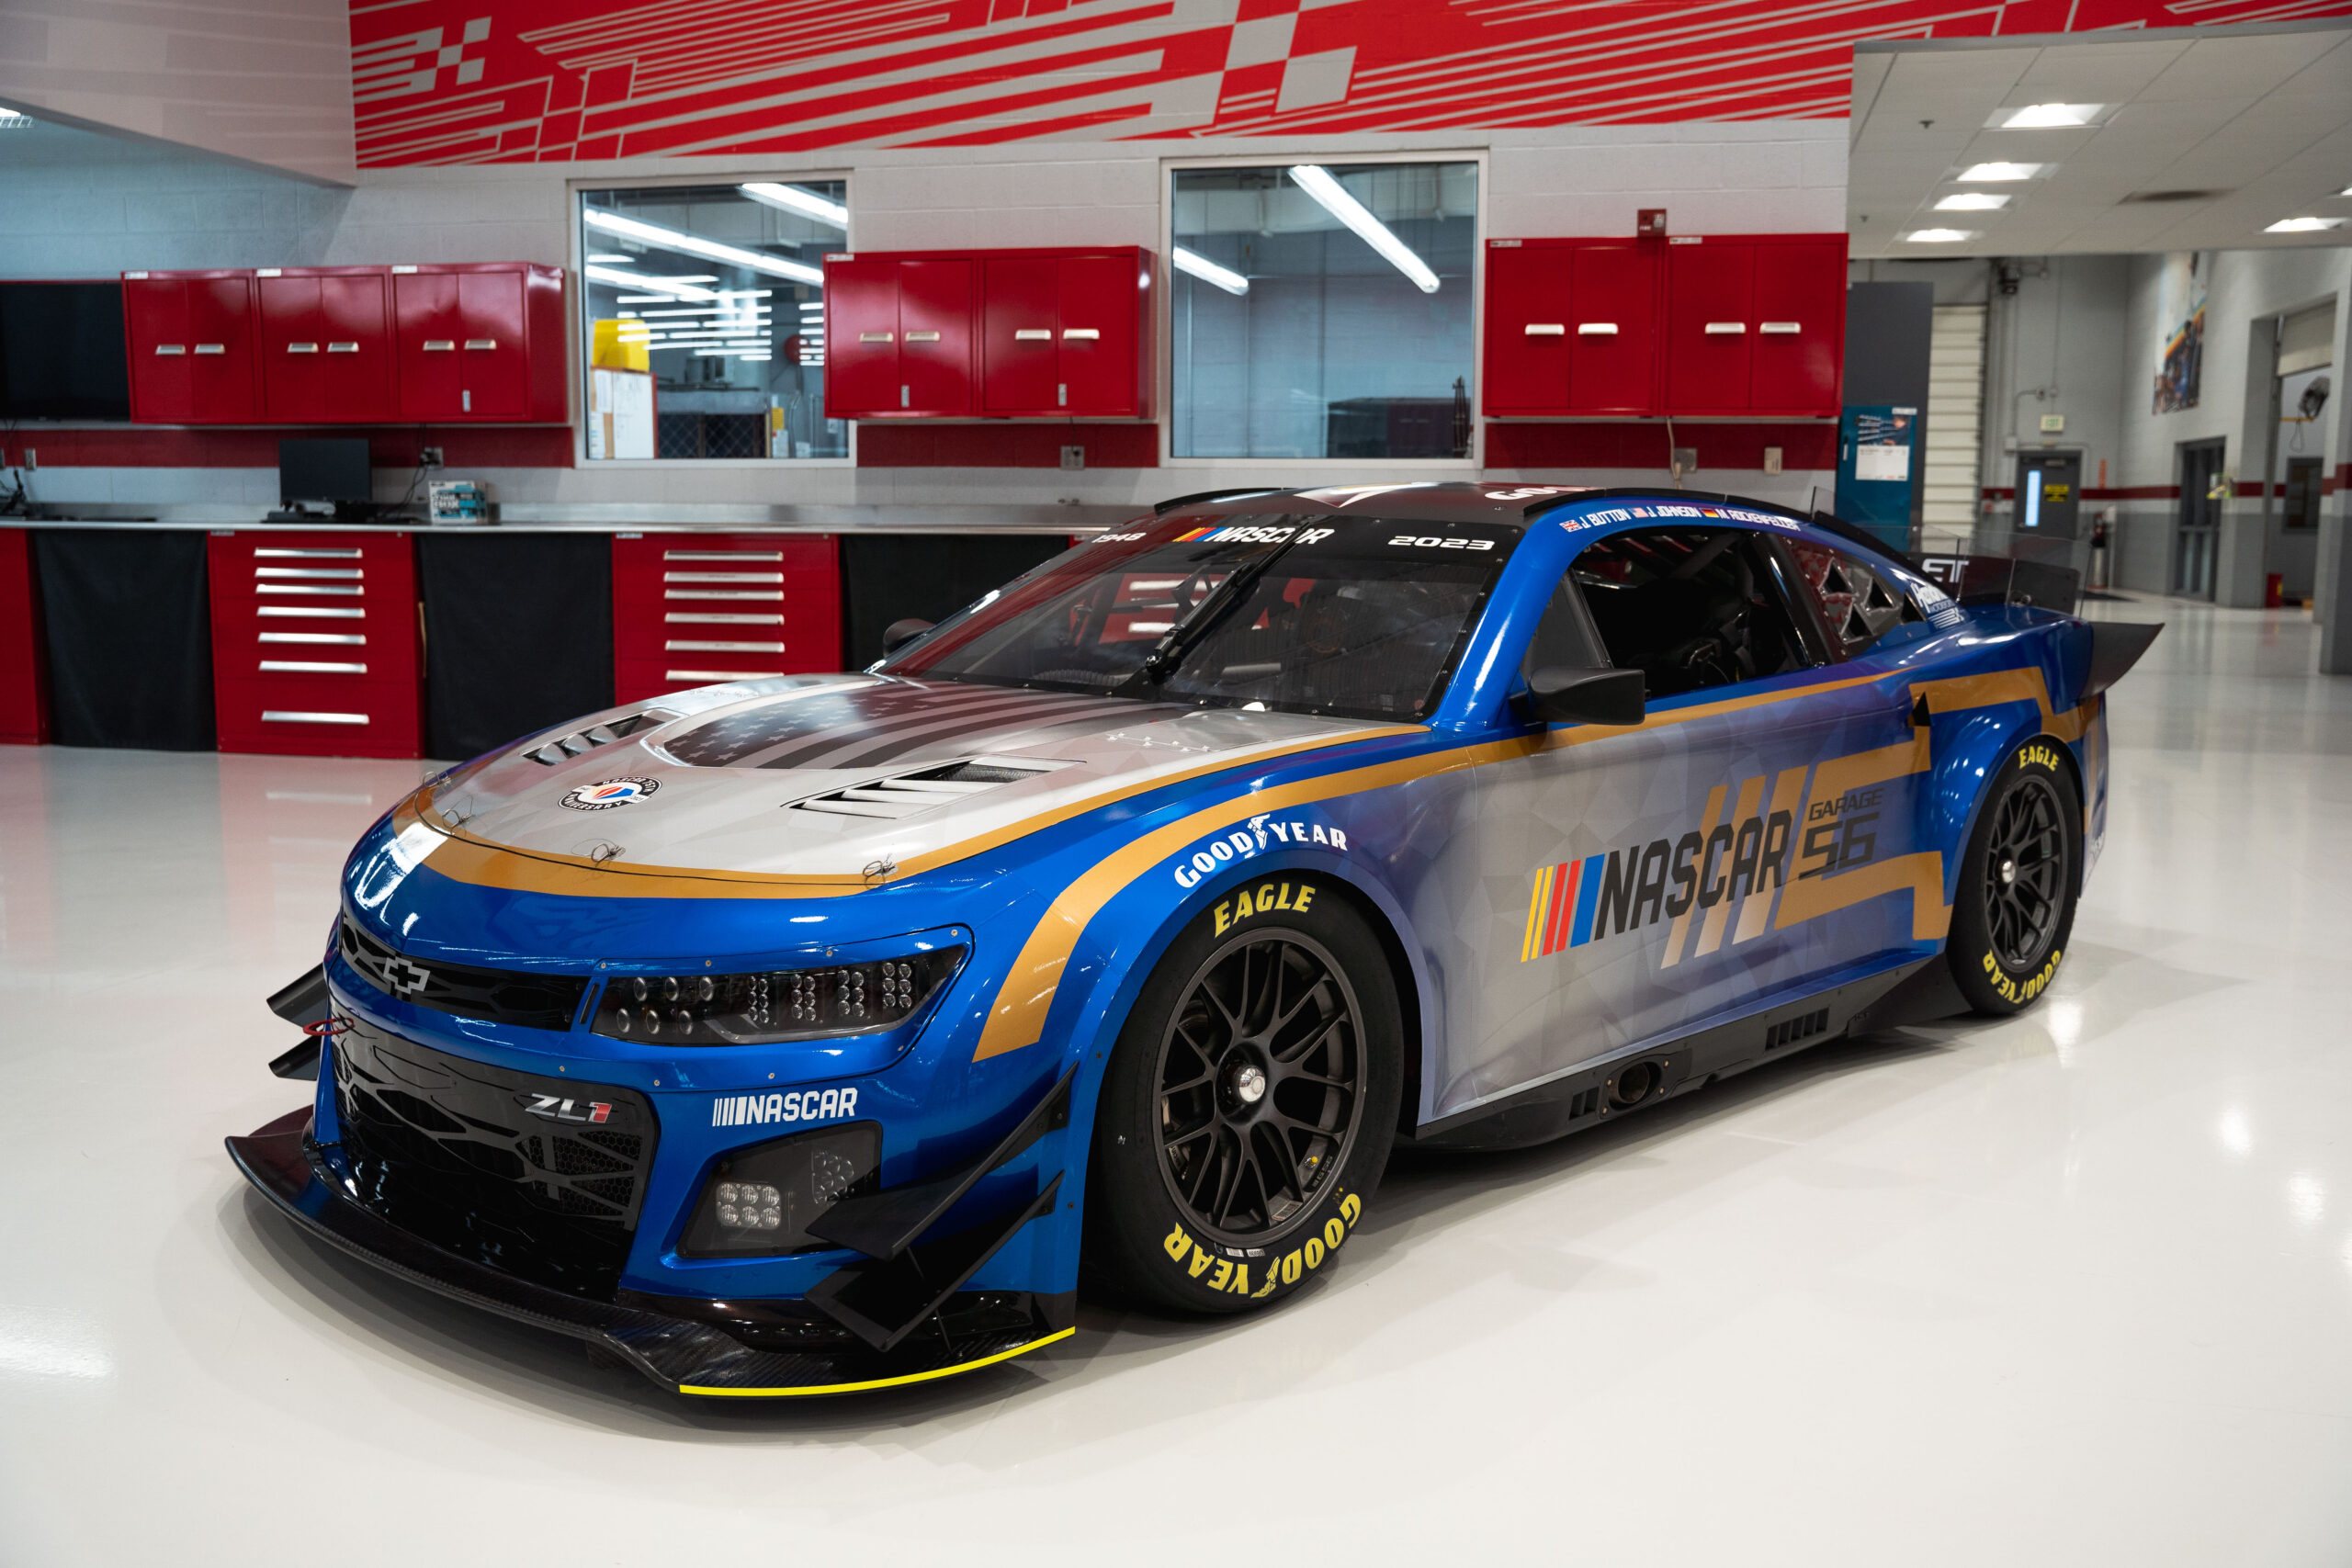 NASCAR Unveils Garage 56 Car and Livery to Compete at 24 Hours of Le